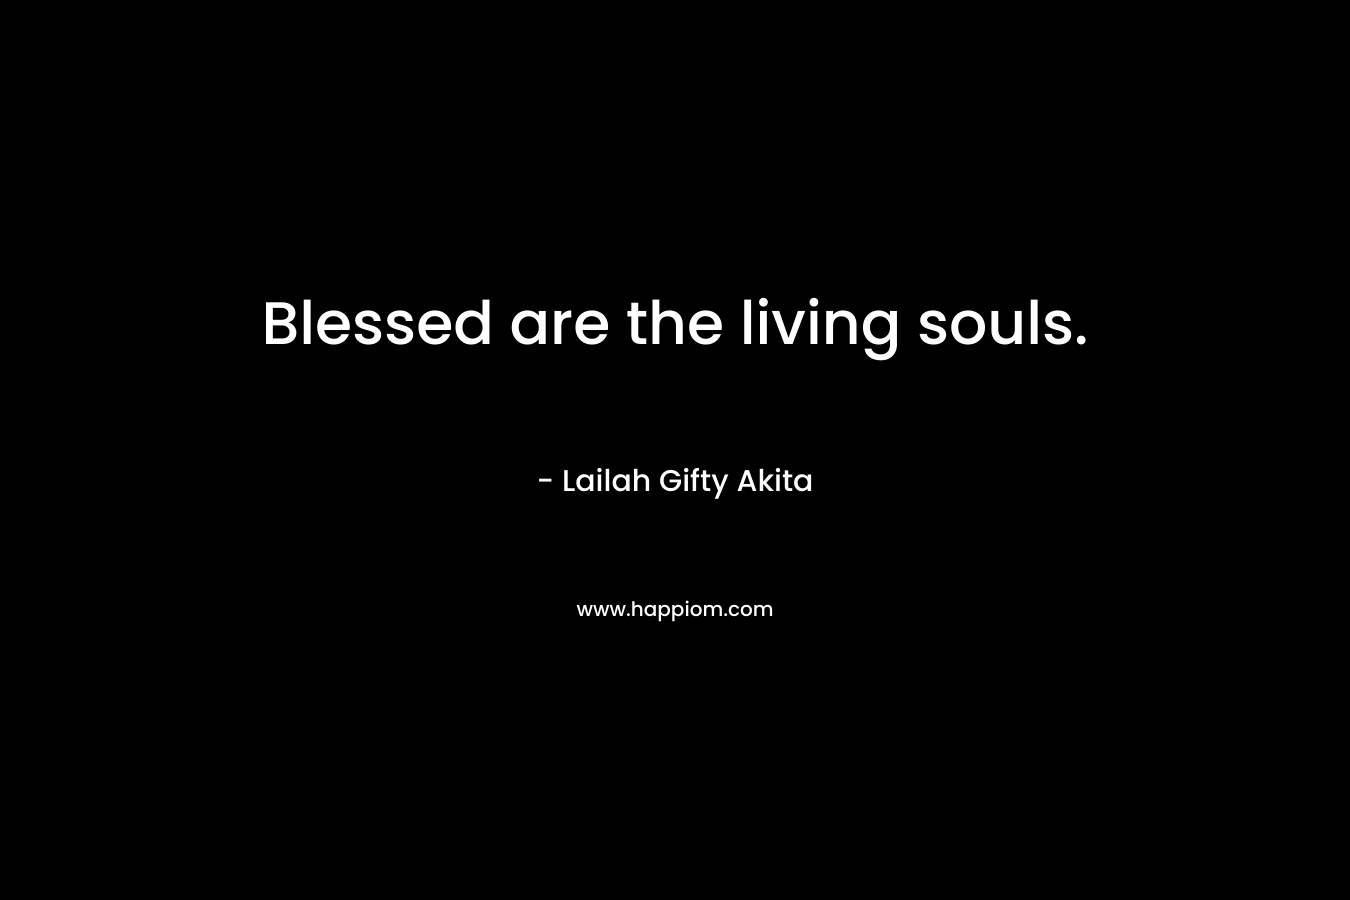 Blessed are the living souls.